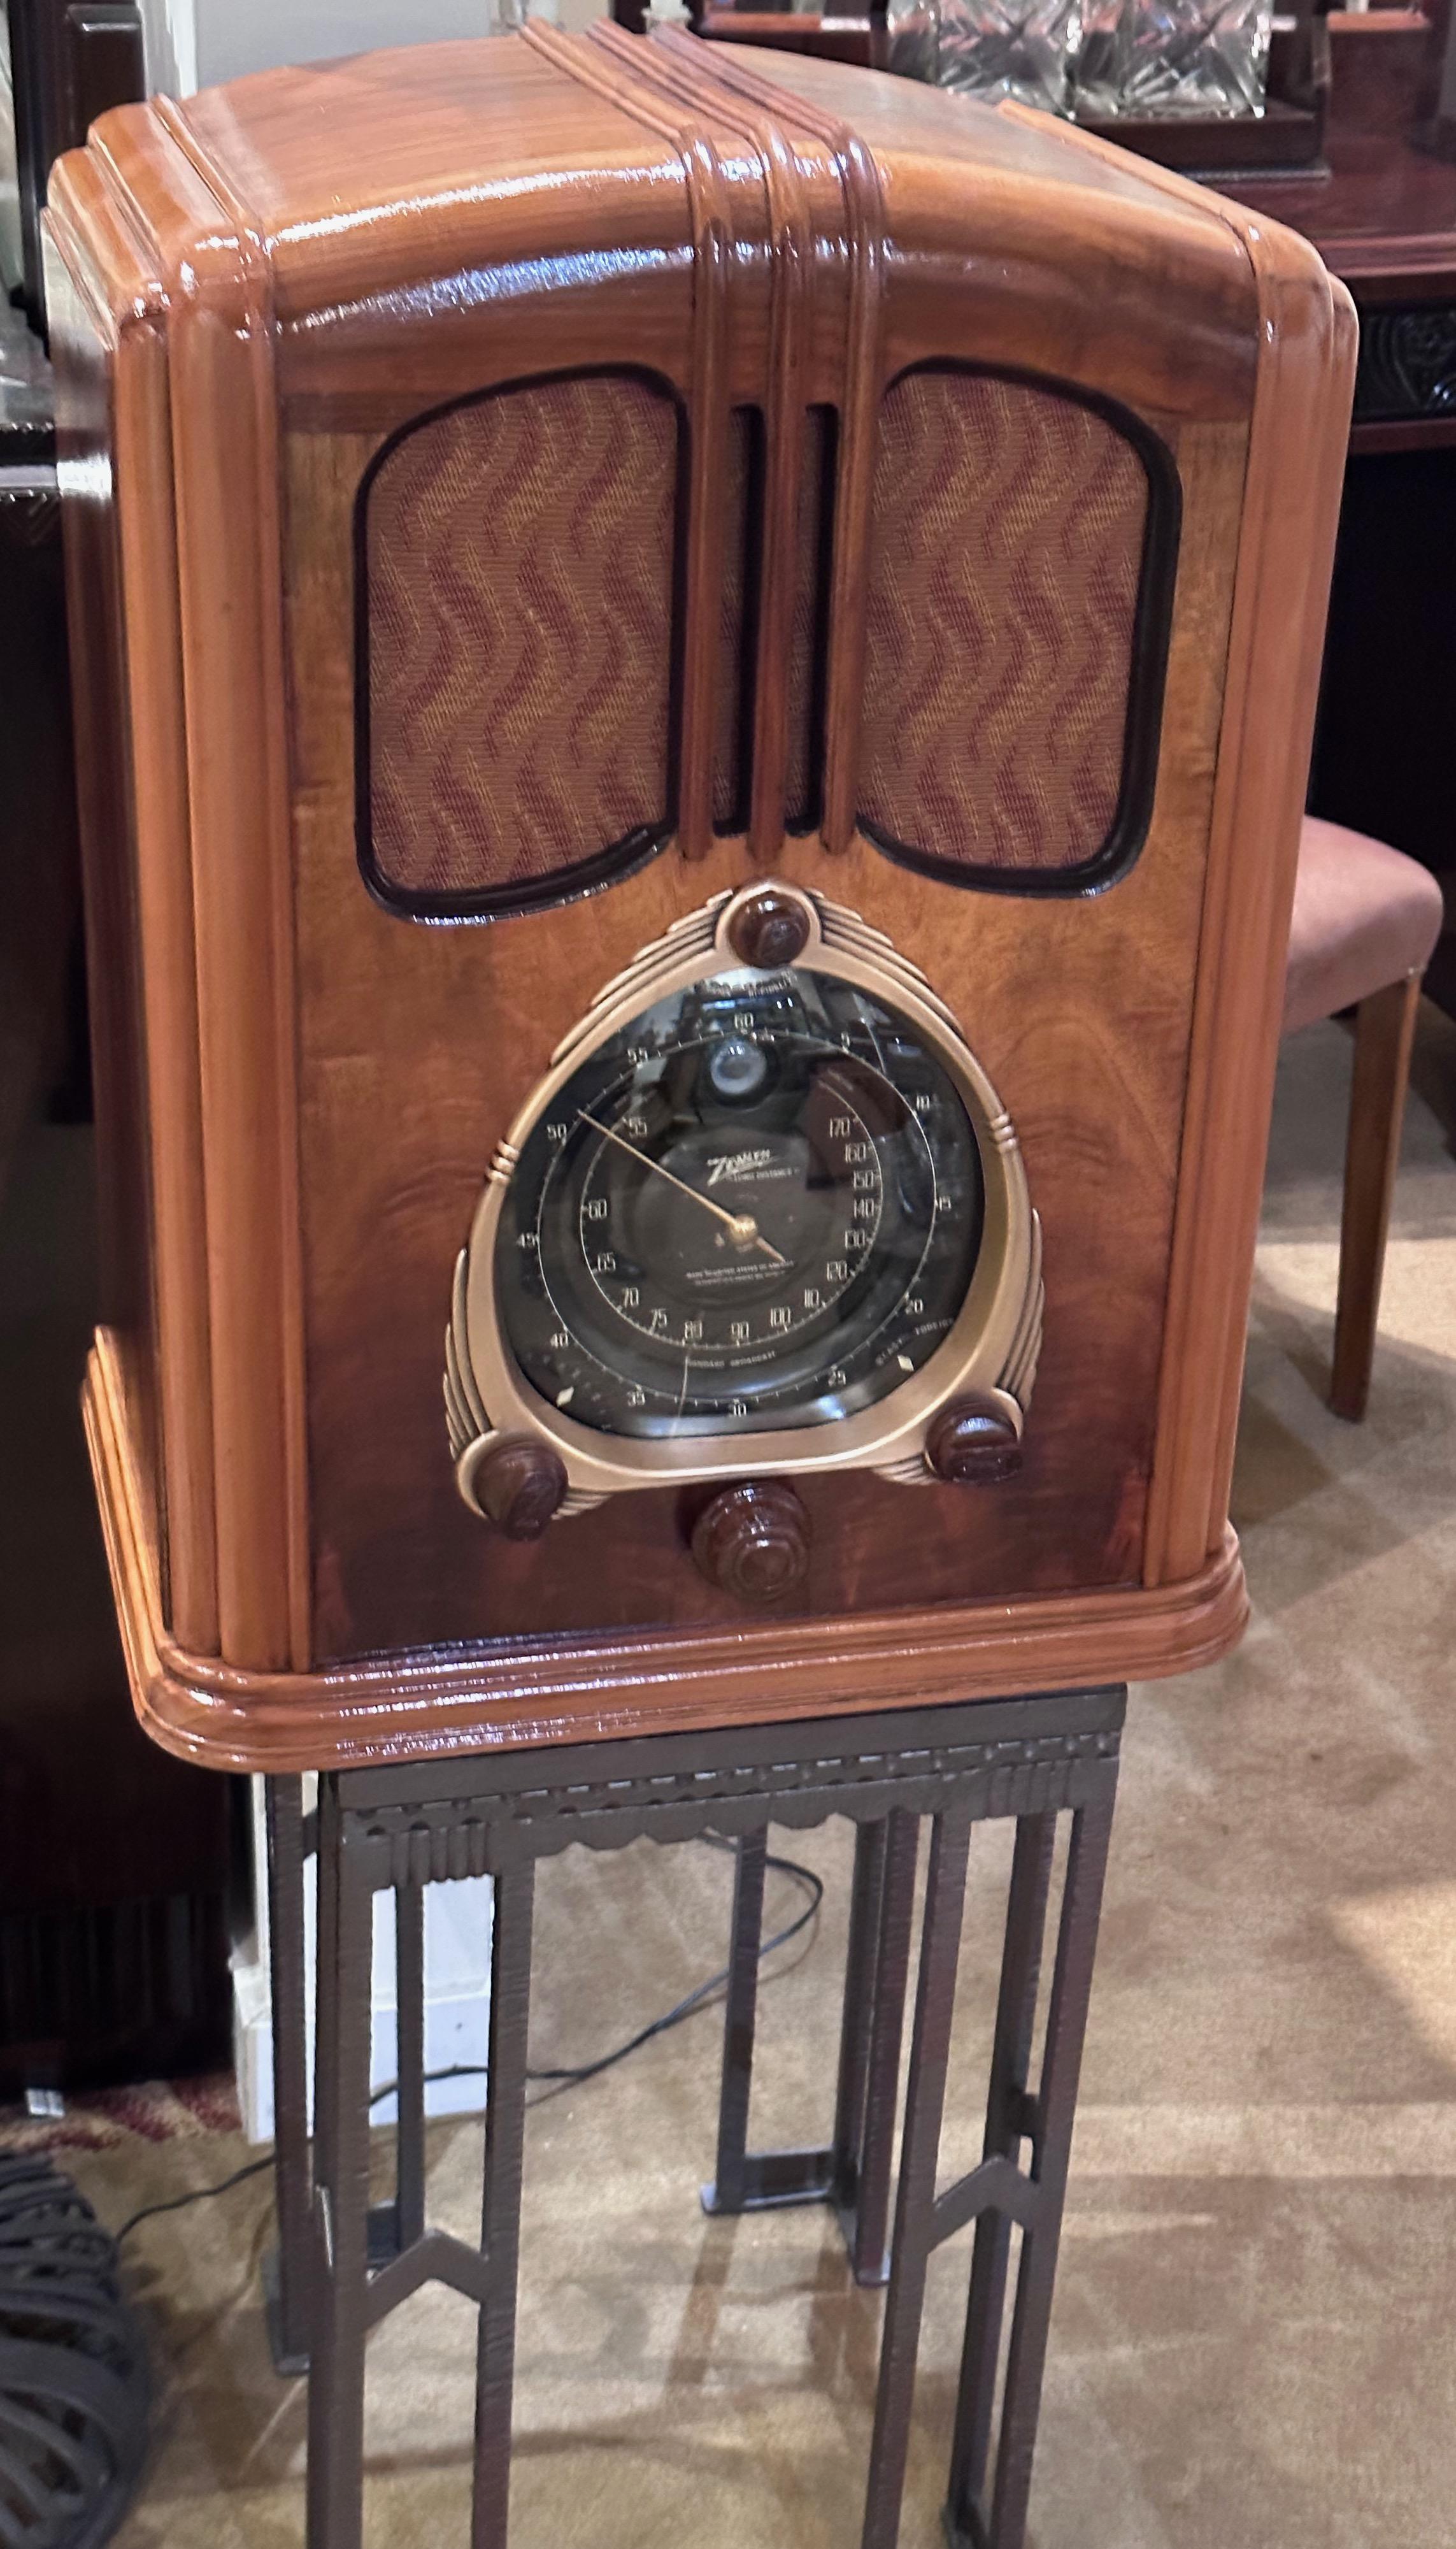 1938 Zenith “WALTON” 9-S-232 Shutter Dial Tombstone Art Deco Radio in pristine restored condition.  Sought after of all of these old radios and displayed on the popular television program “The Waltons”.  This 9- tube Zenith is GORGEOUS!!  The